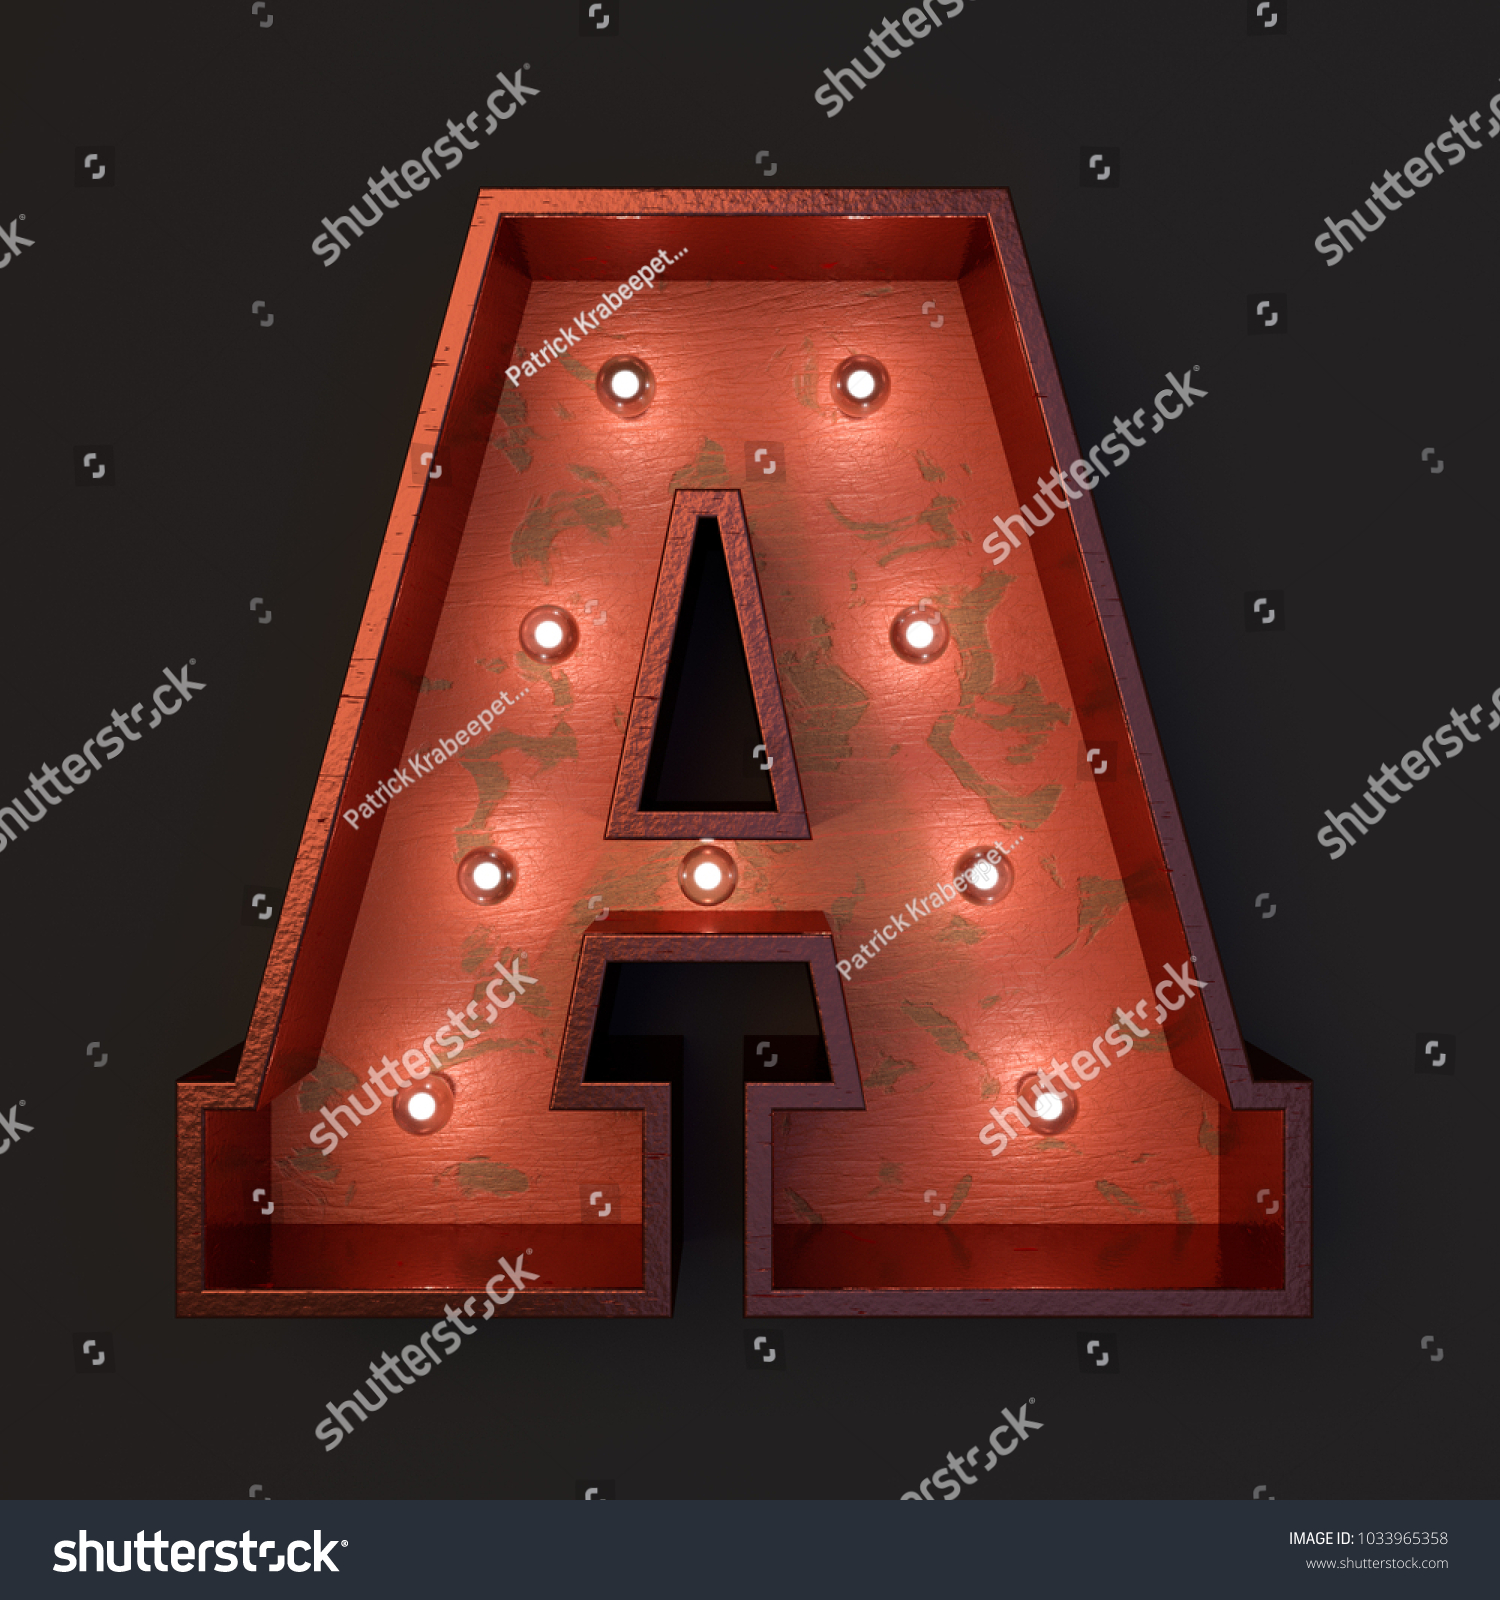 Illuminated marquee light bulb letter A #1033965358